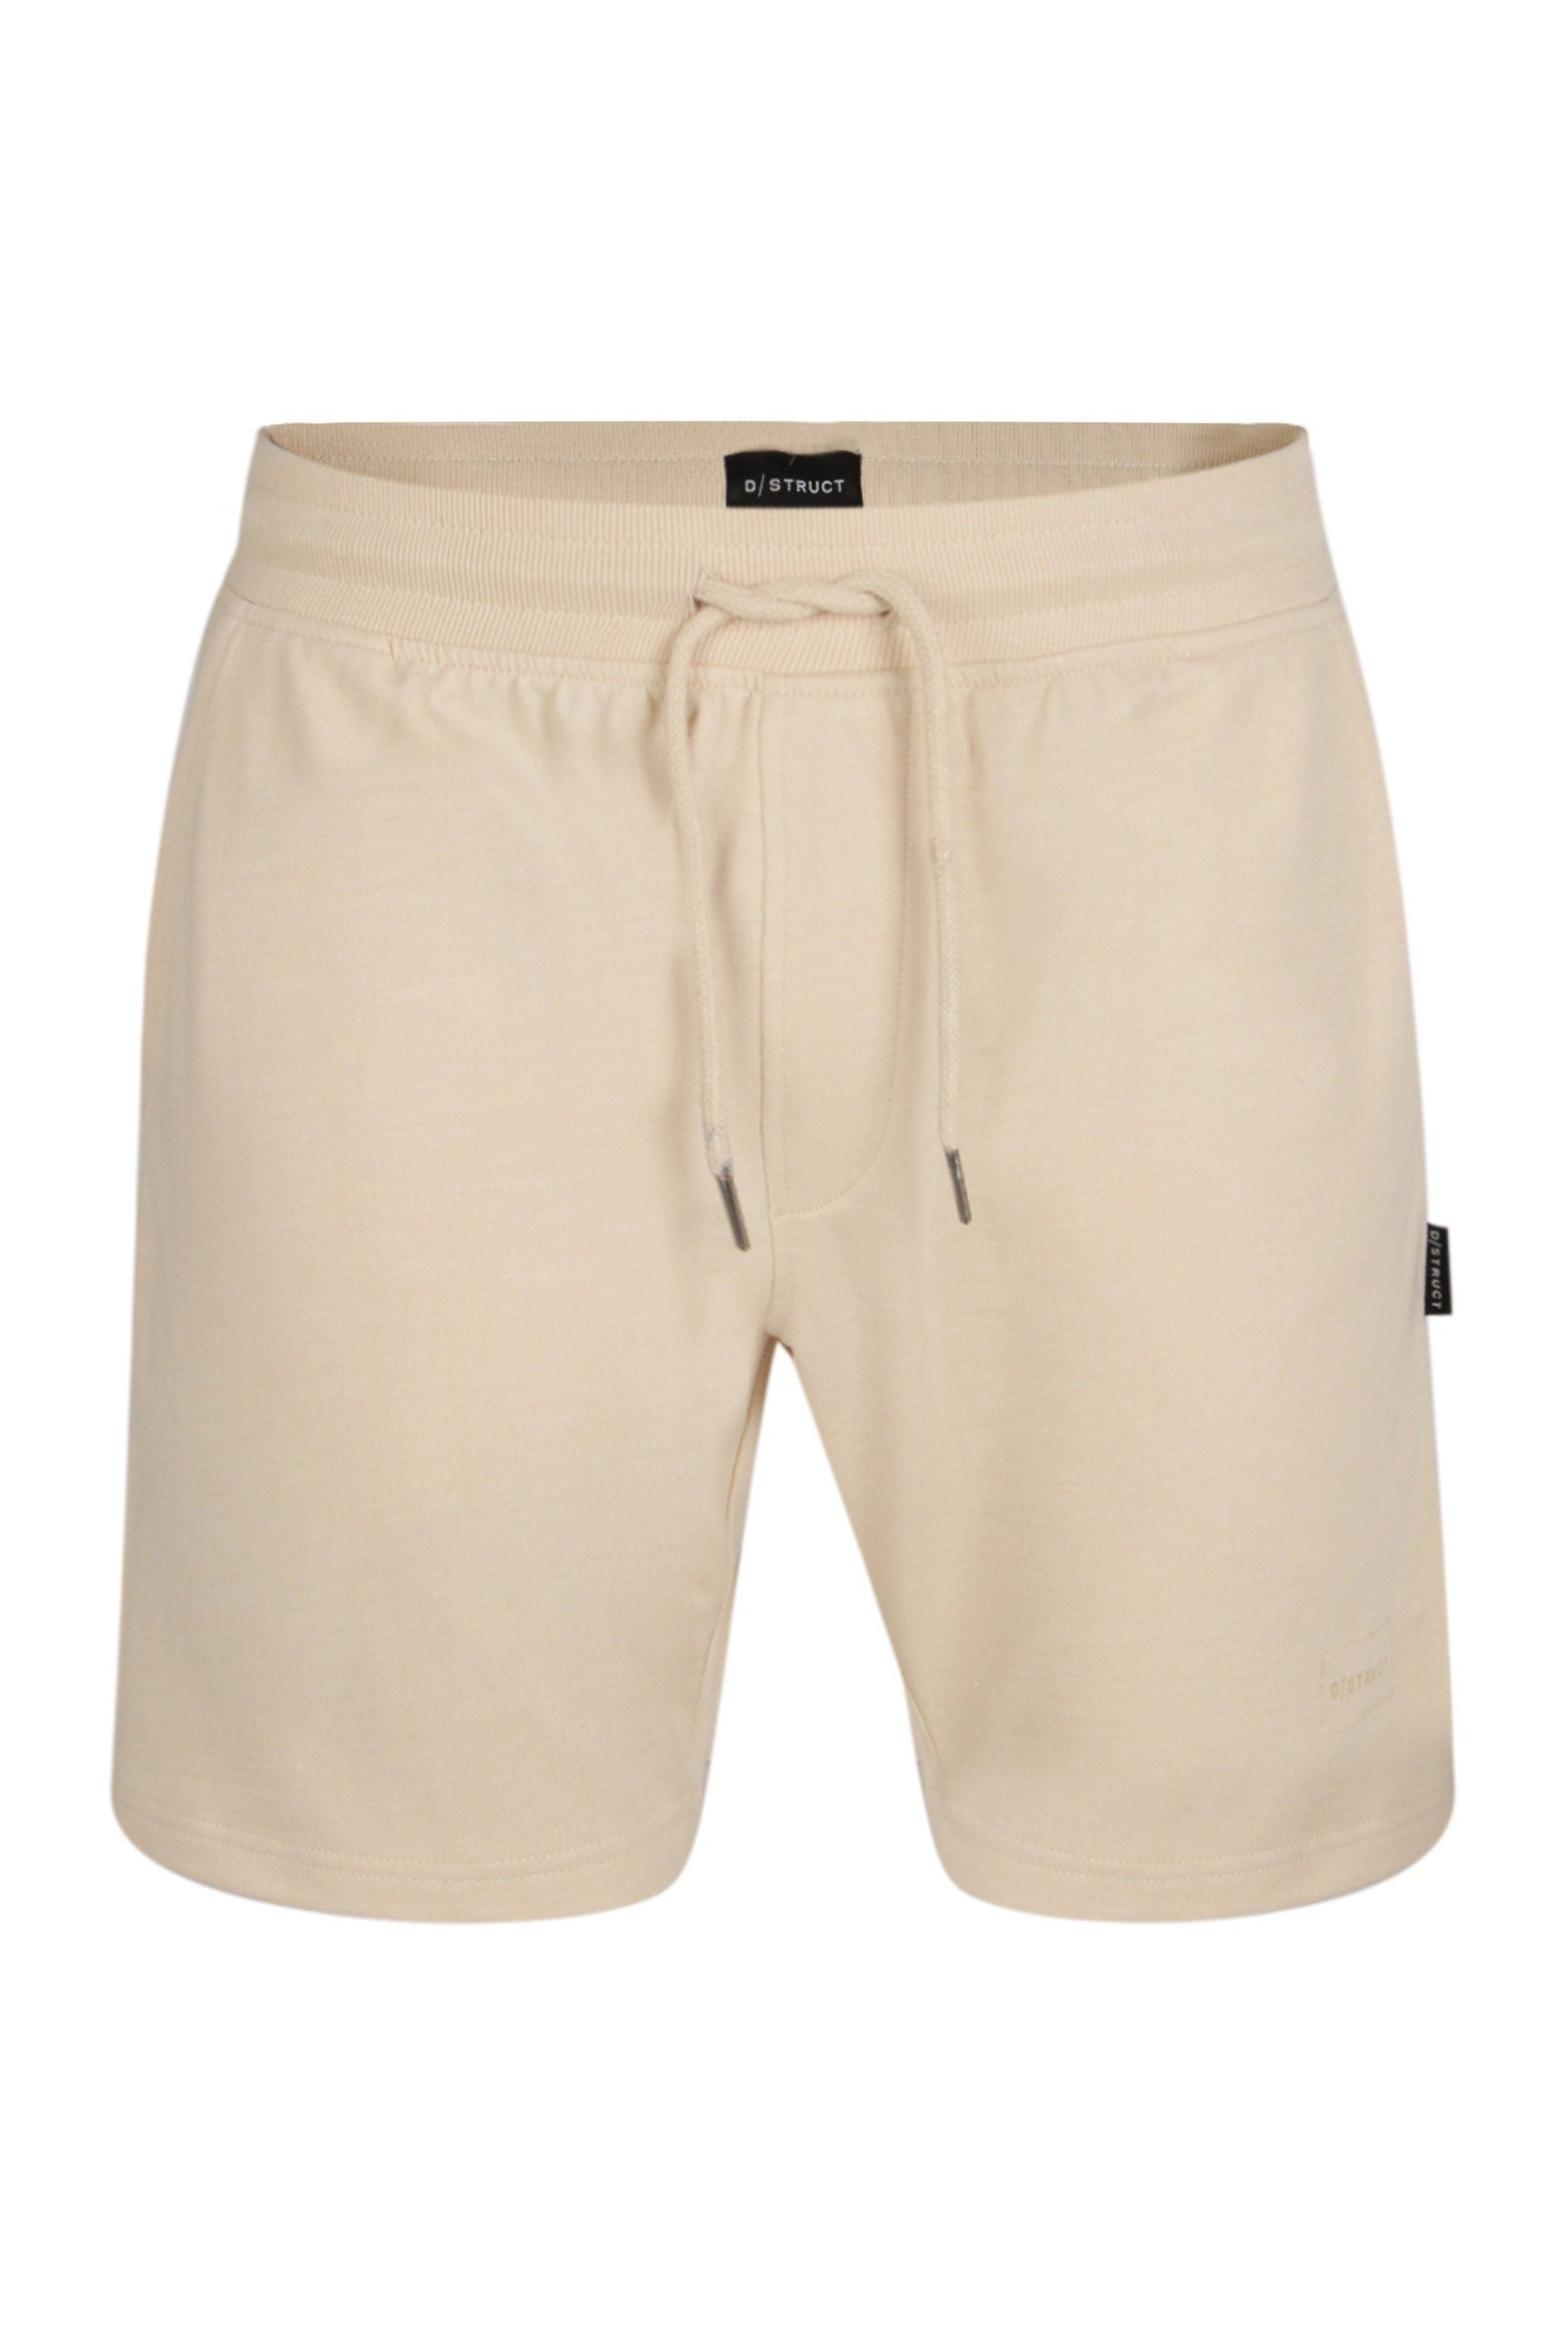 DS Jersey Shorts Sand